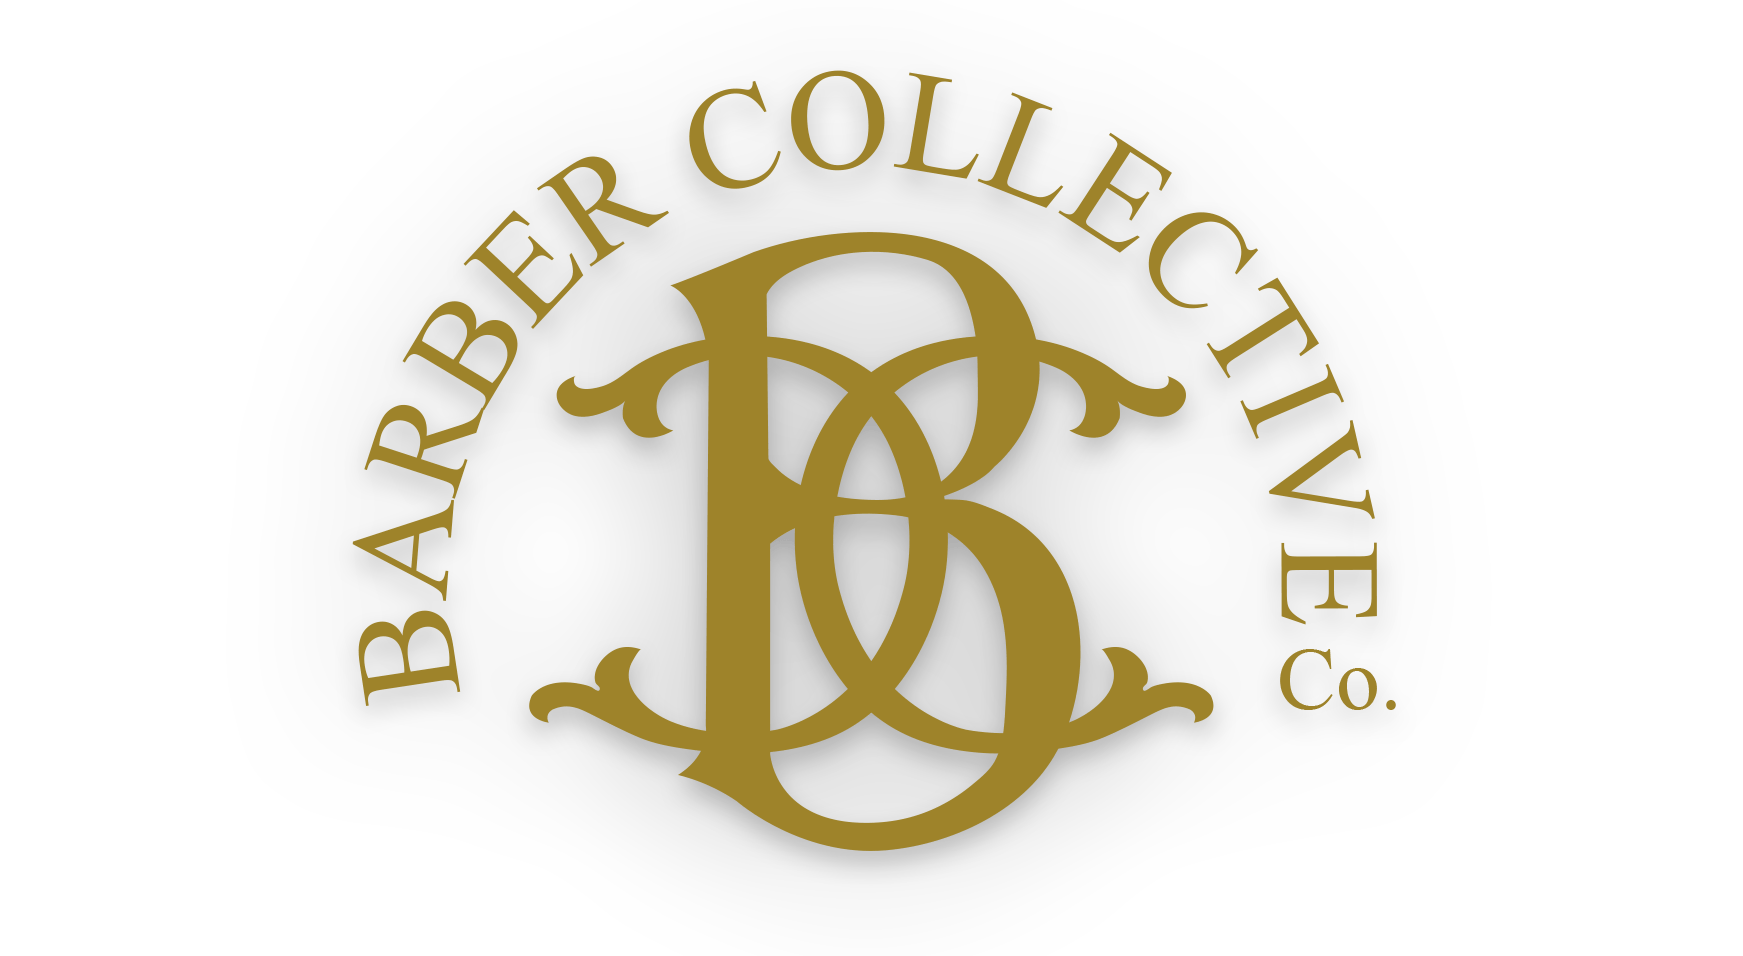 Barber Collective Co